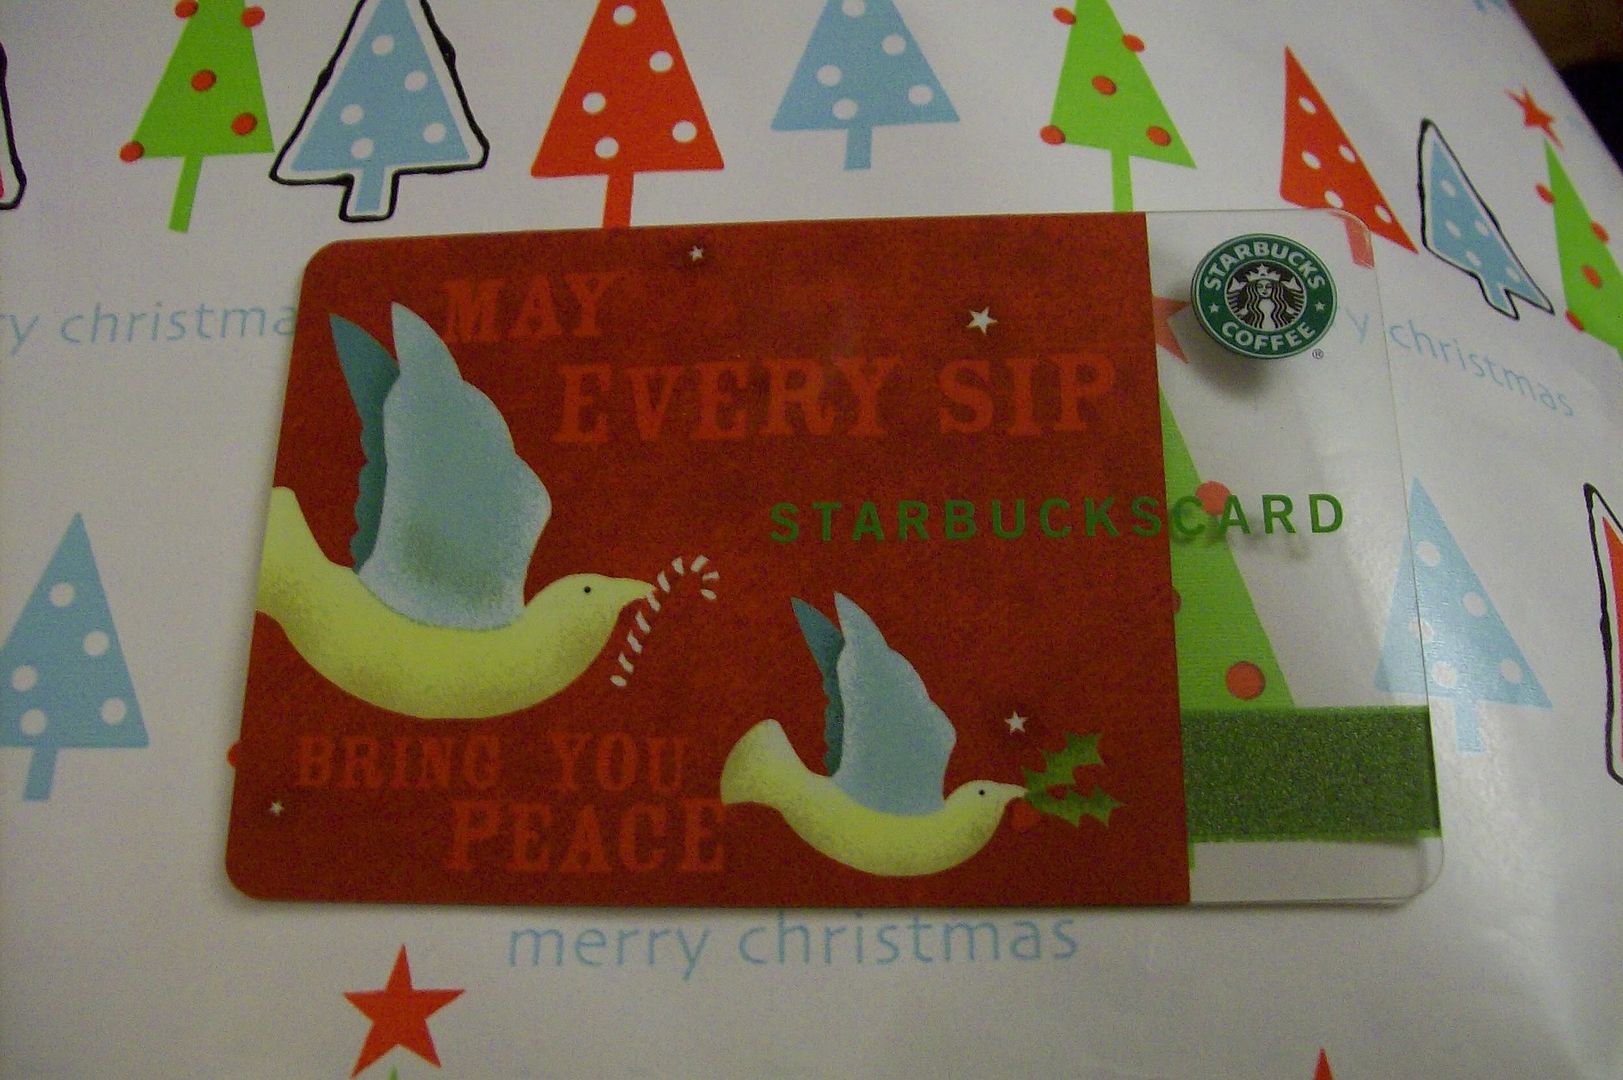 starbucks gift card giveaway